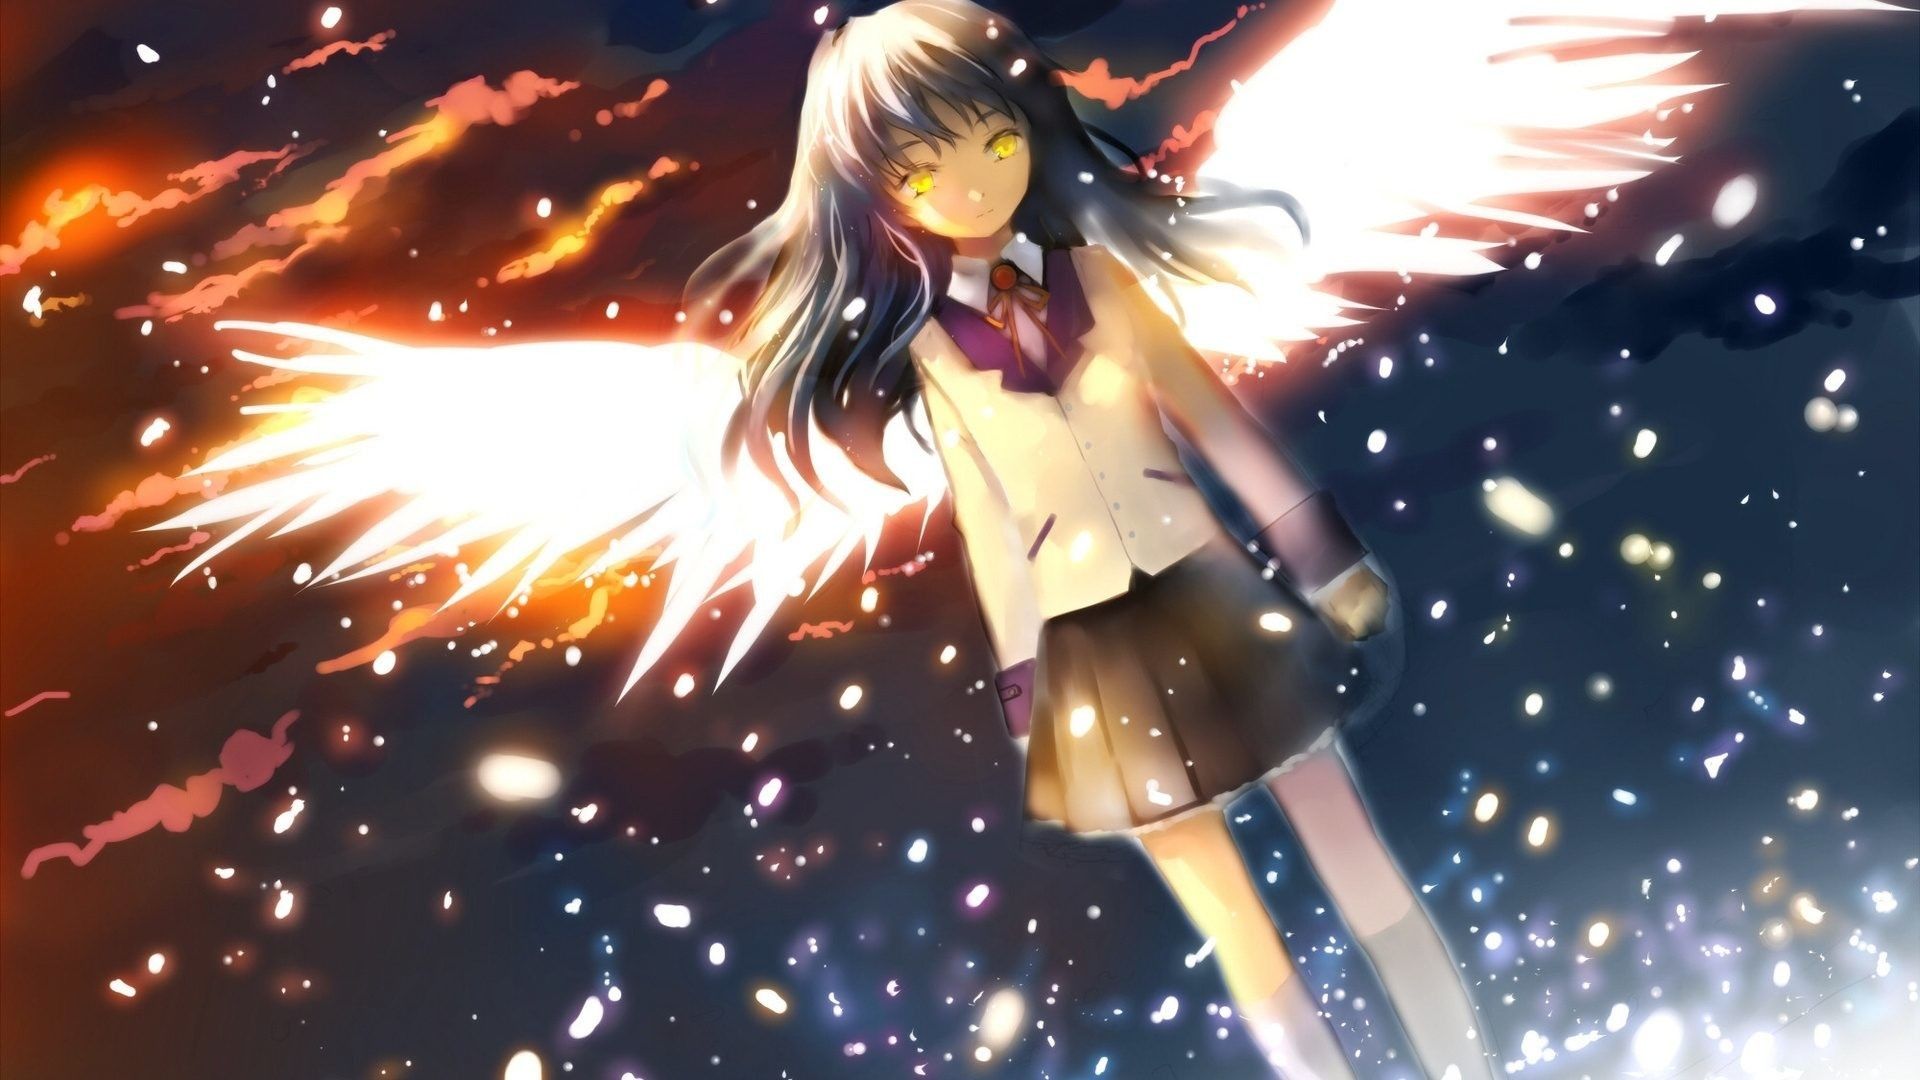 Res: 1920x Download Anime HD Wallpaper Background Image angel beats girl brunette space wings 27665. อะนิเมะ